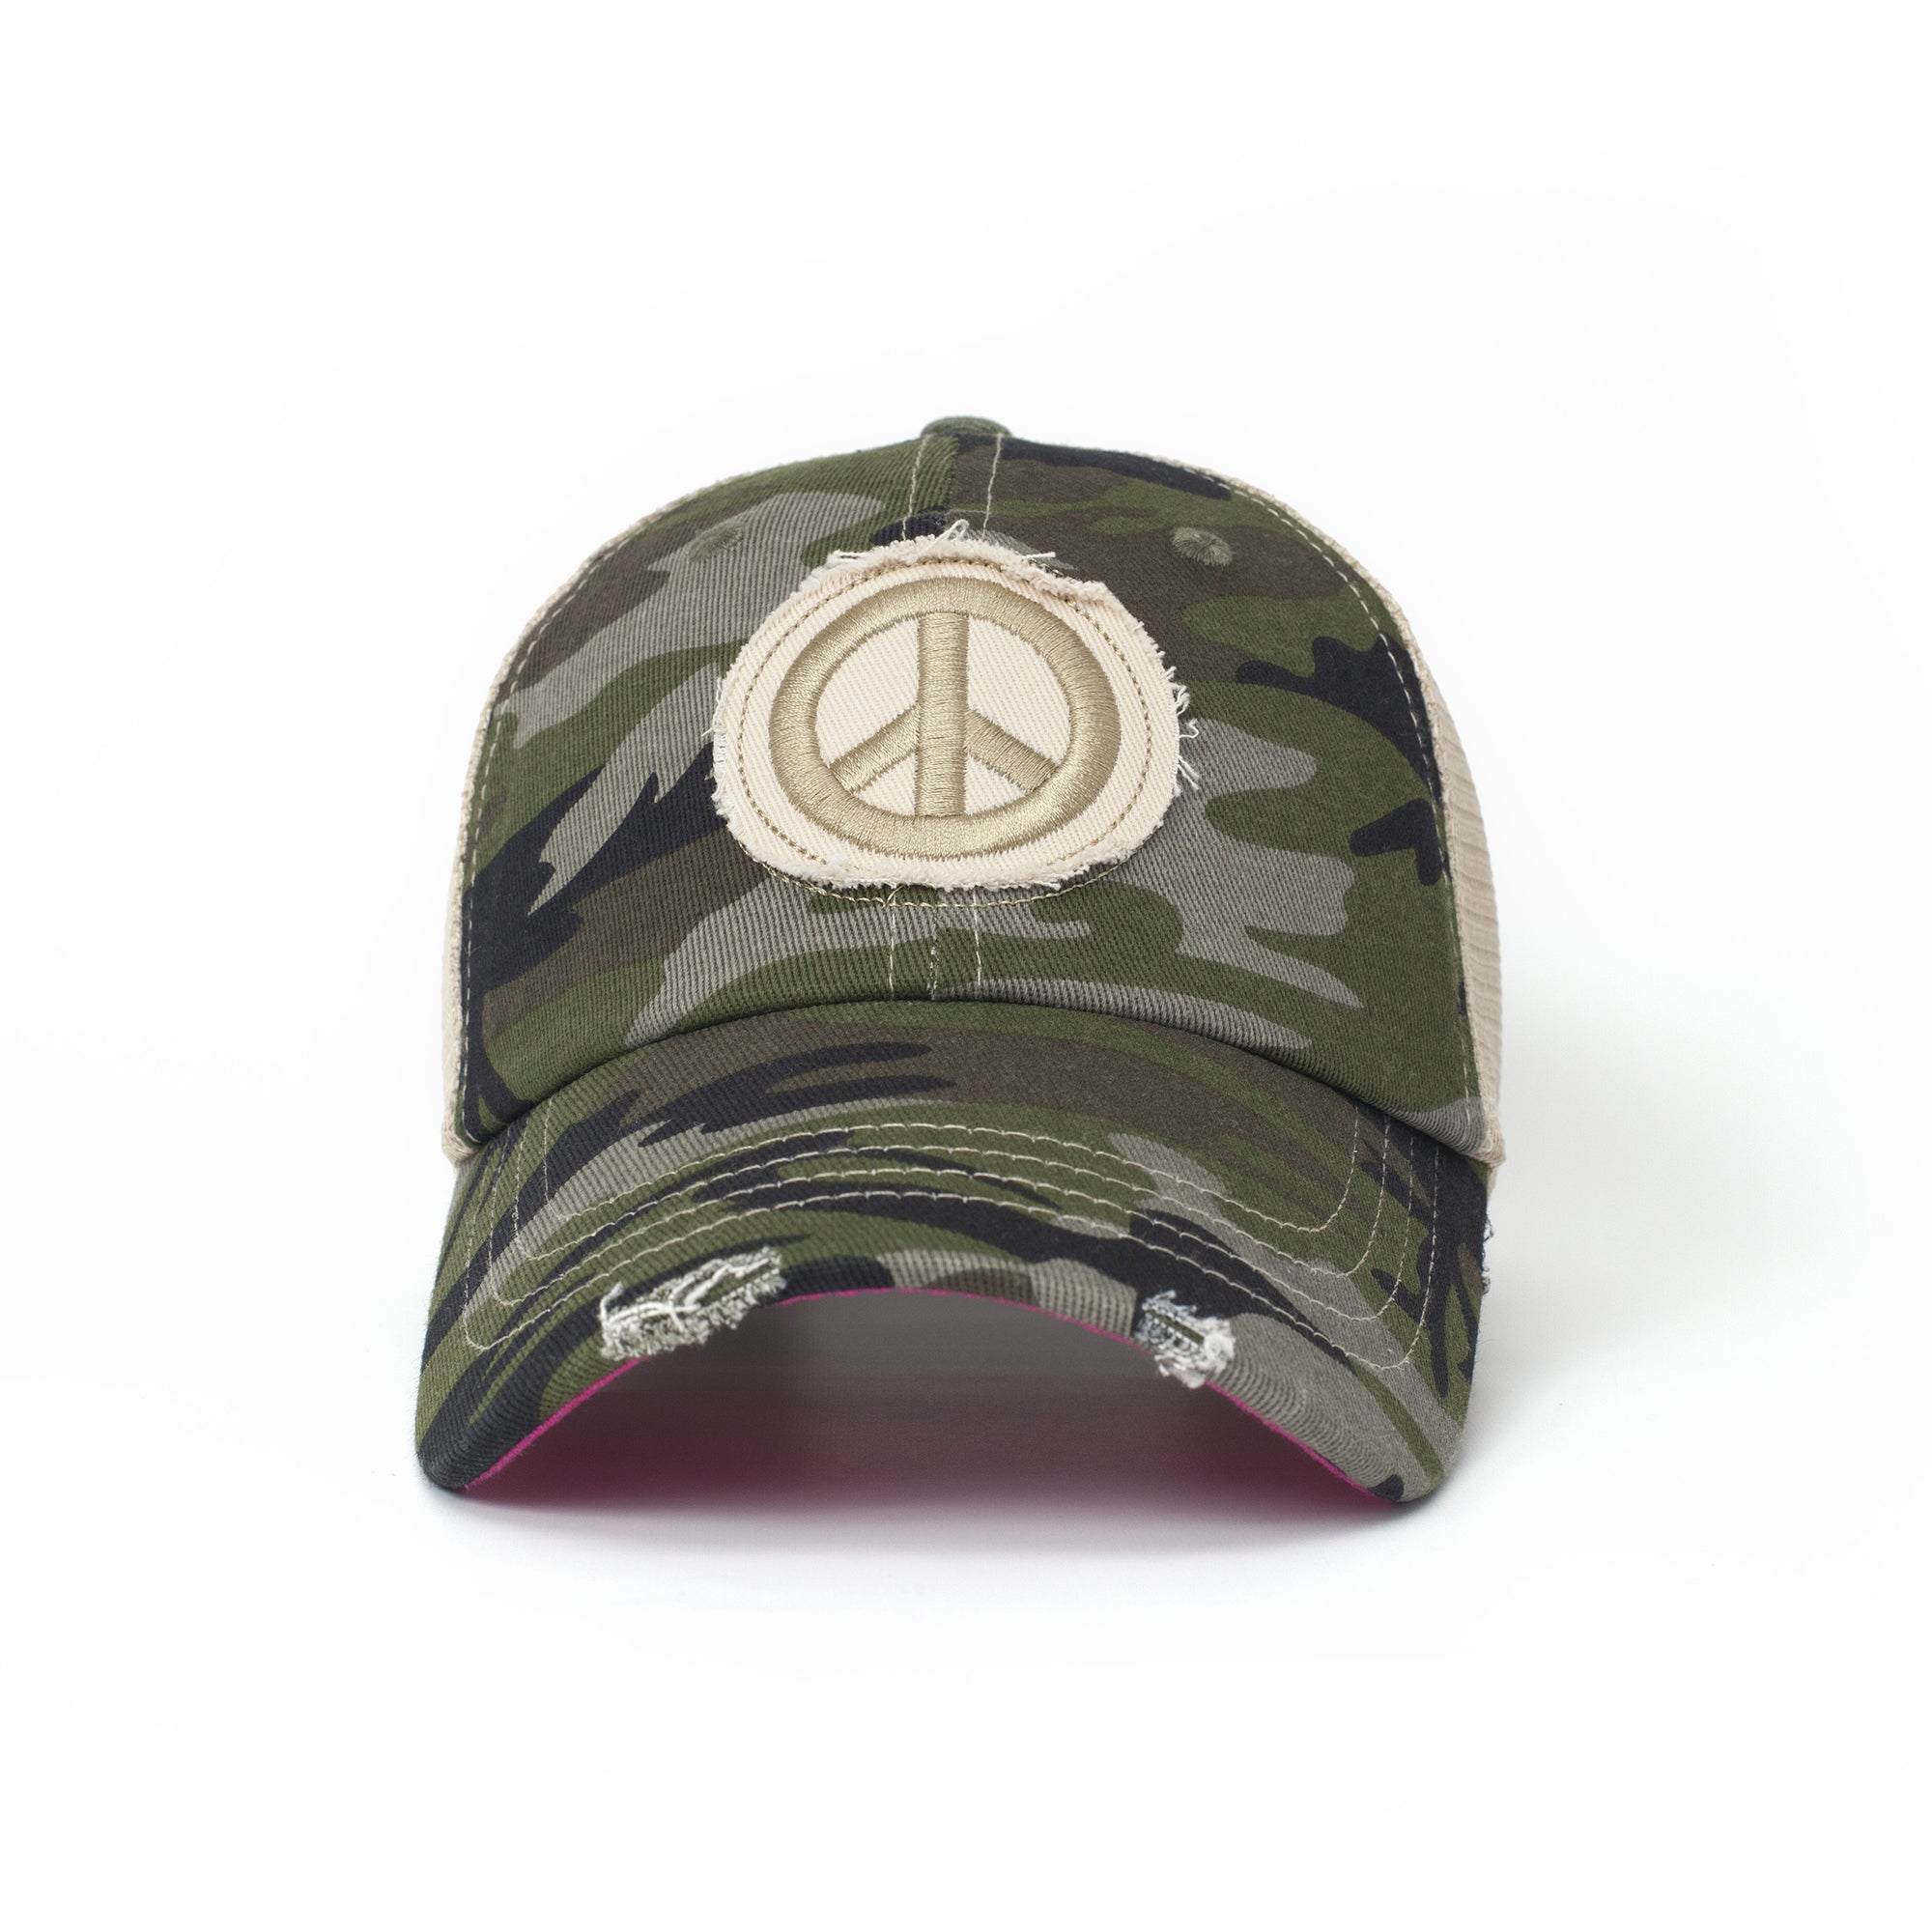 Kid’s Hats, Kid’s Trucker Hats, Trucker Hats, Hats, Adjustable Hats, Everyday Use, Comfortable, Peace Sign, Camofloge, Peaceful, Pattern